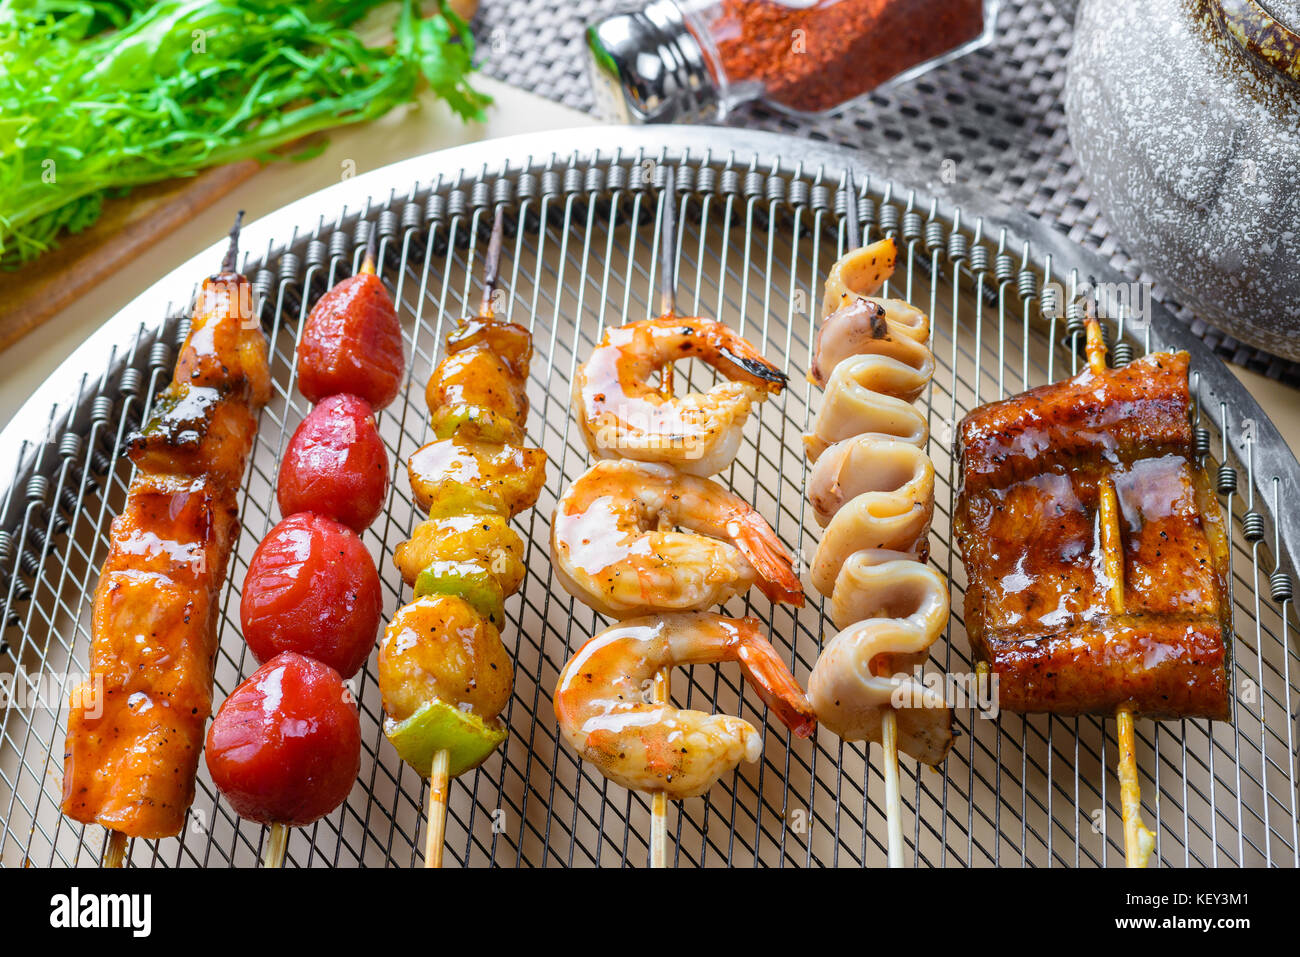 Seafood barbecue on grill Stock Photo